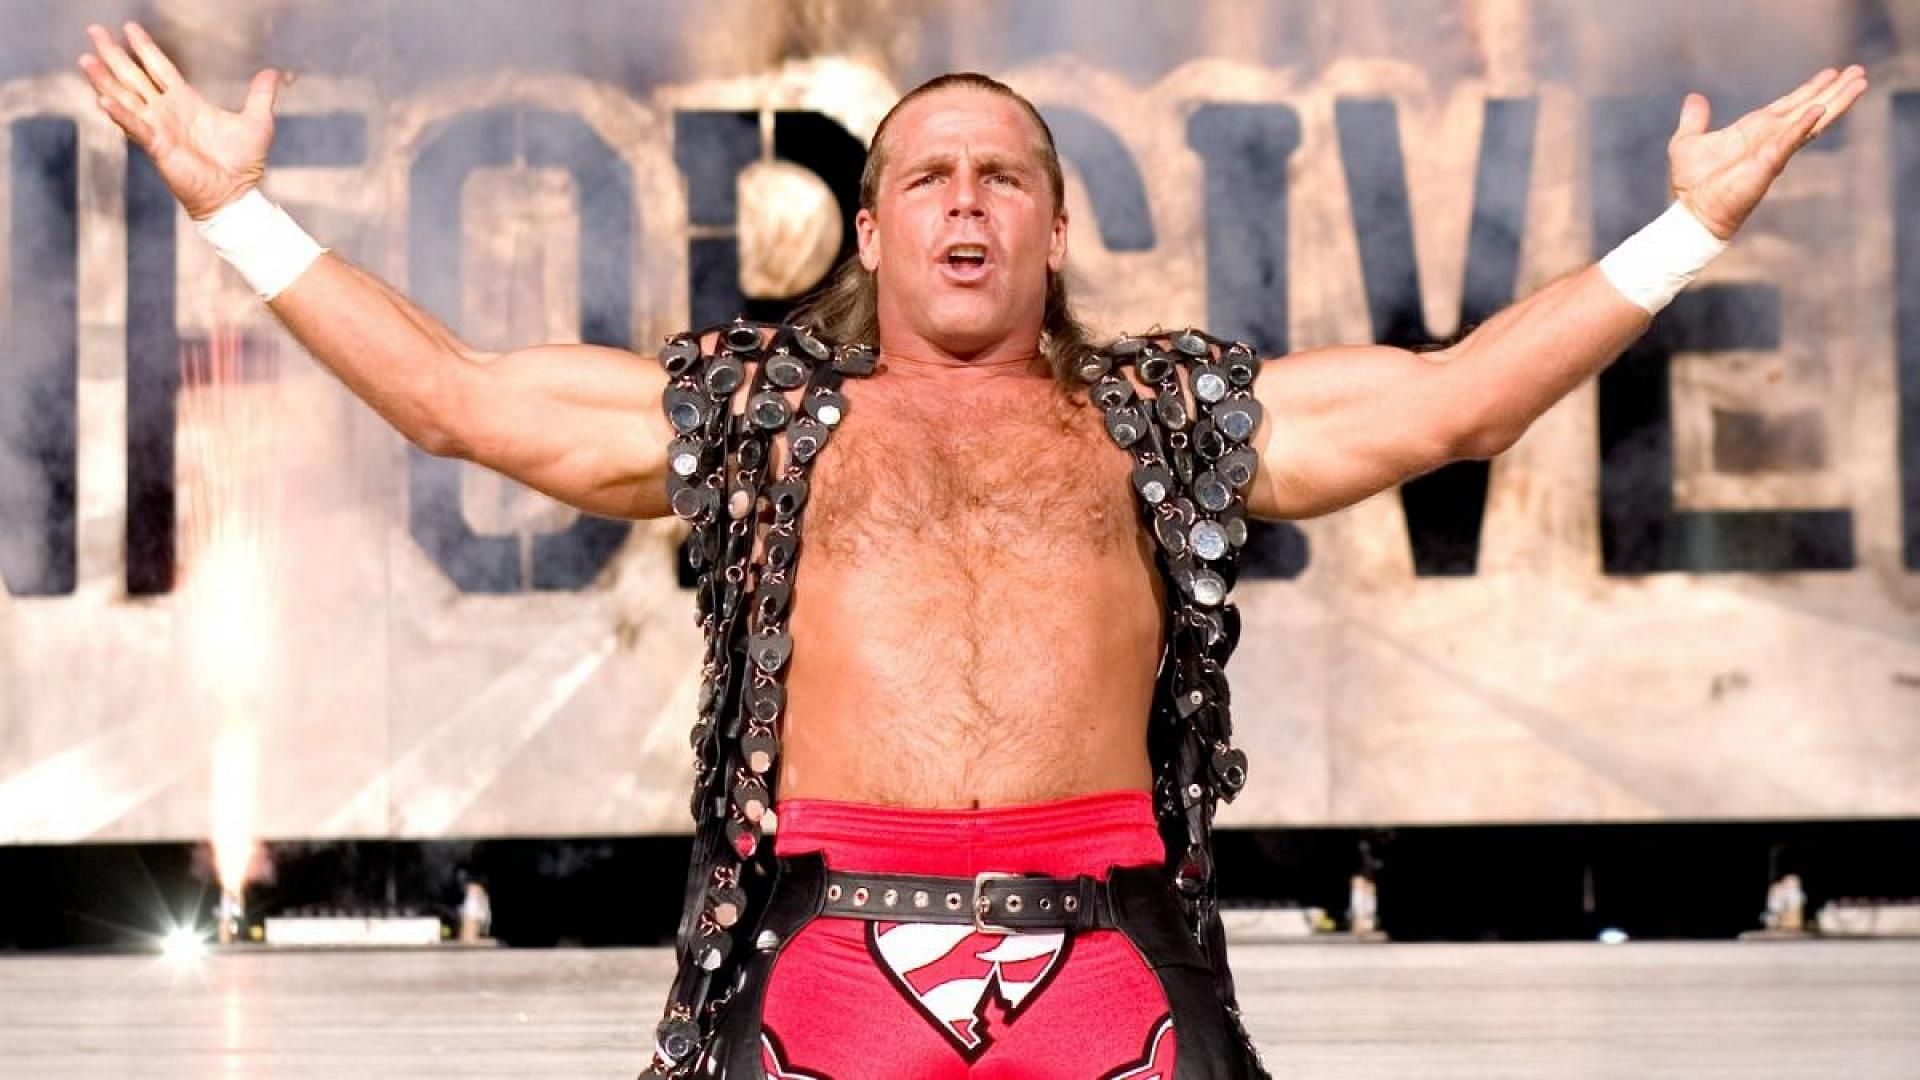 Shawn Michaels is one of the greatest Royal Rumble performers in WWE history